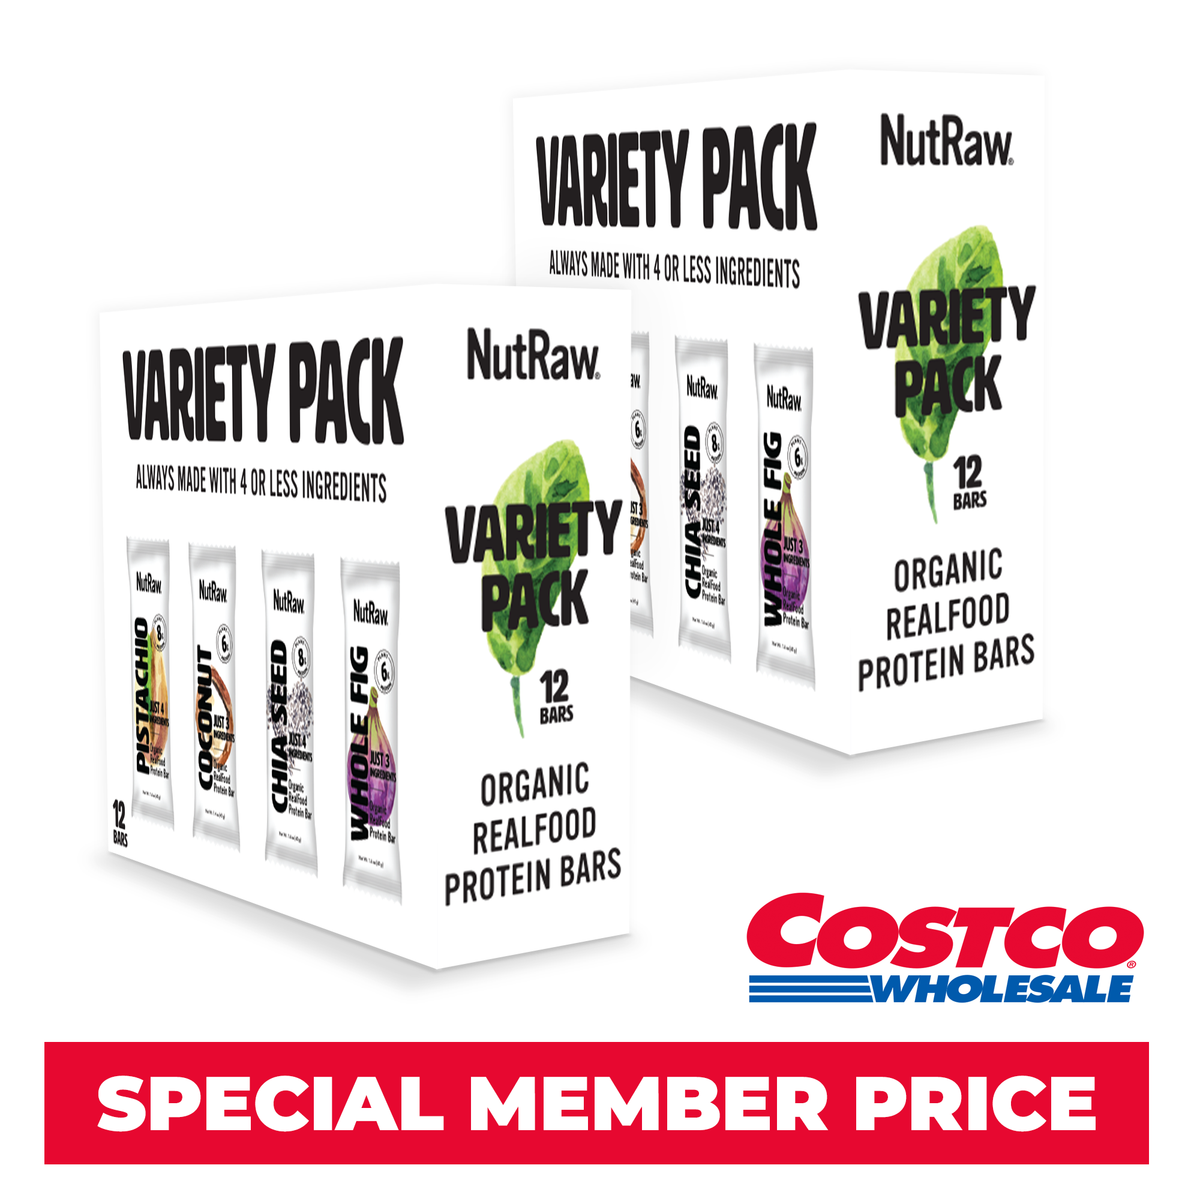 2 Variety Pack Costco Special